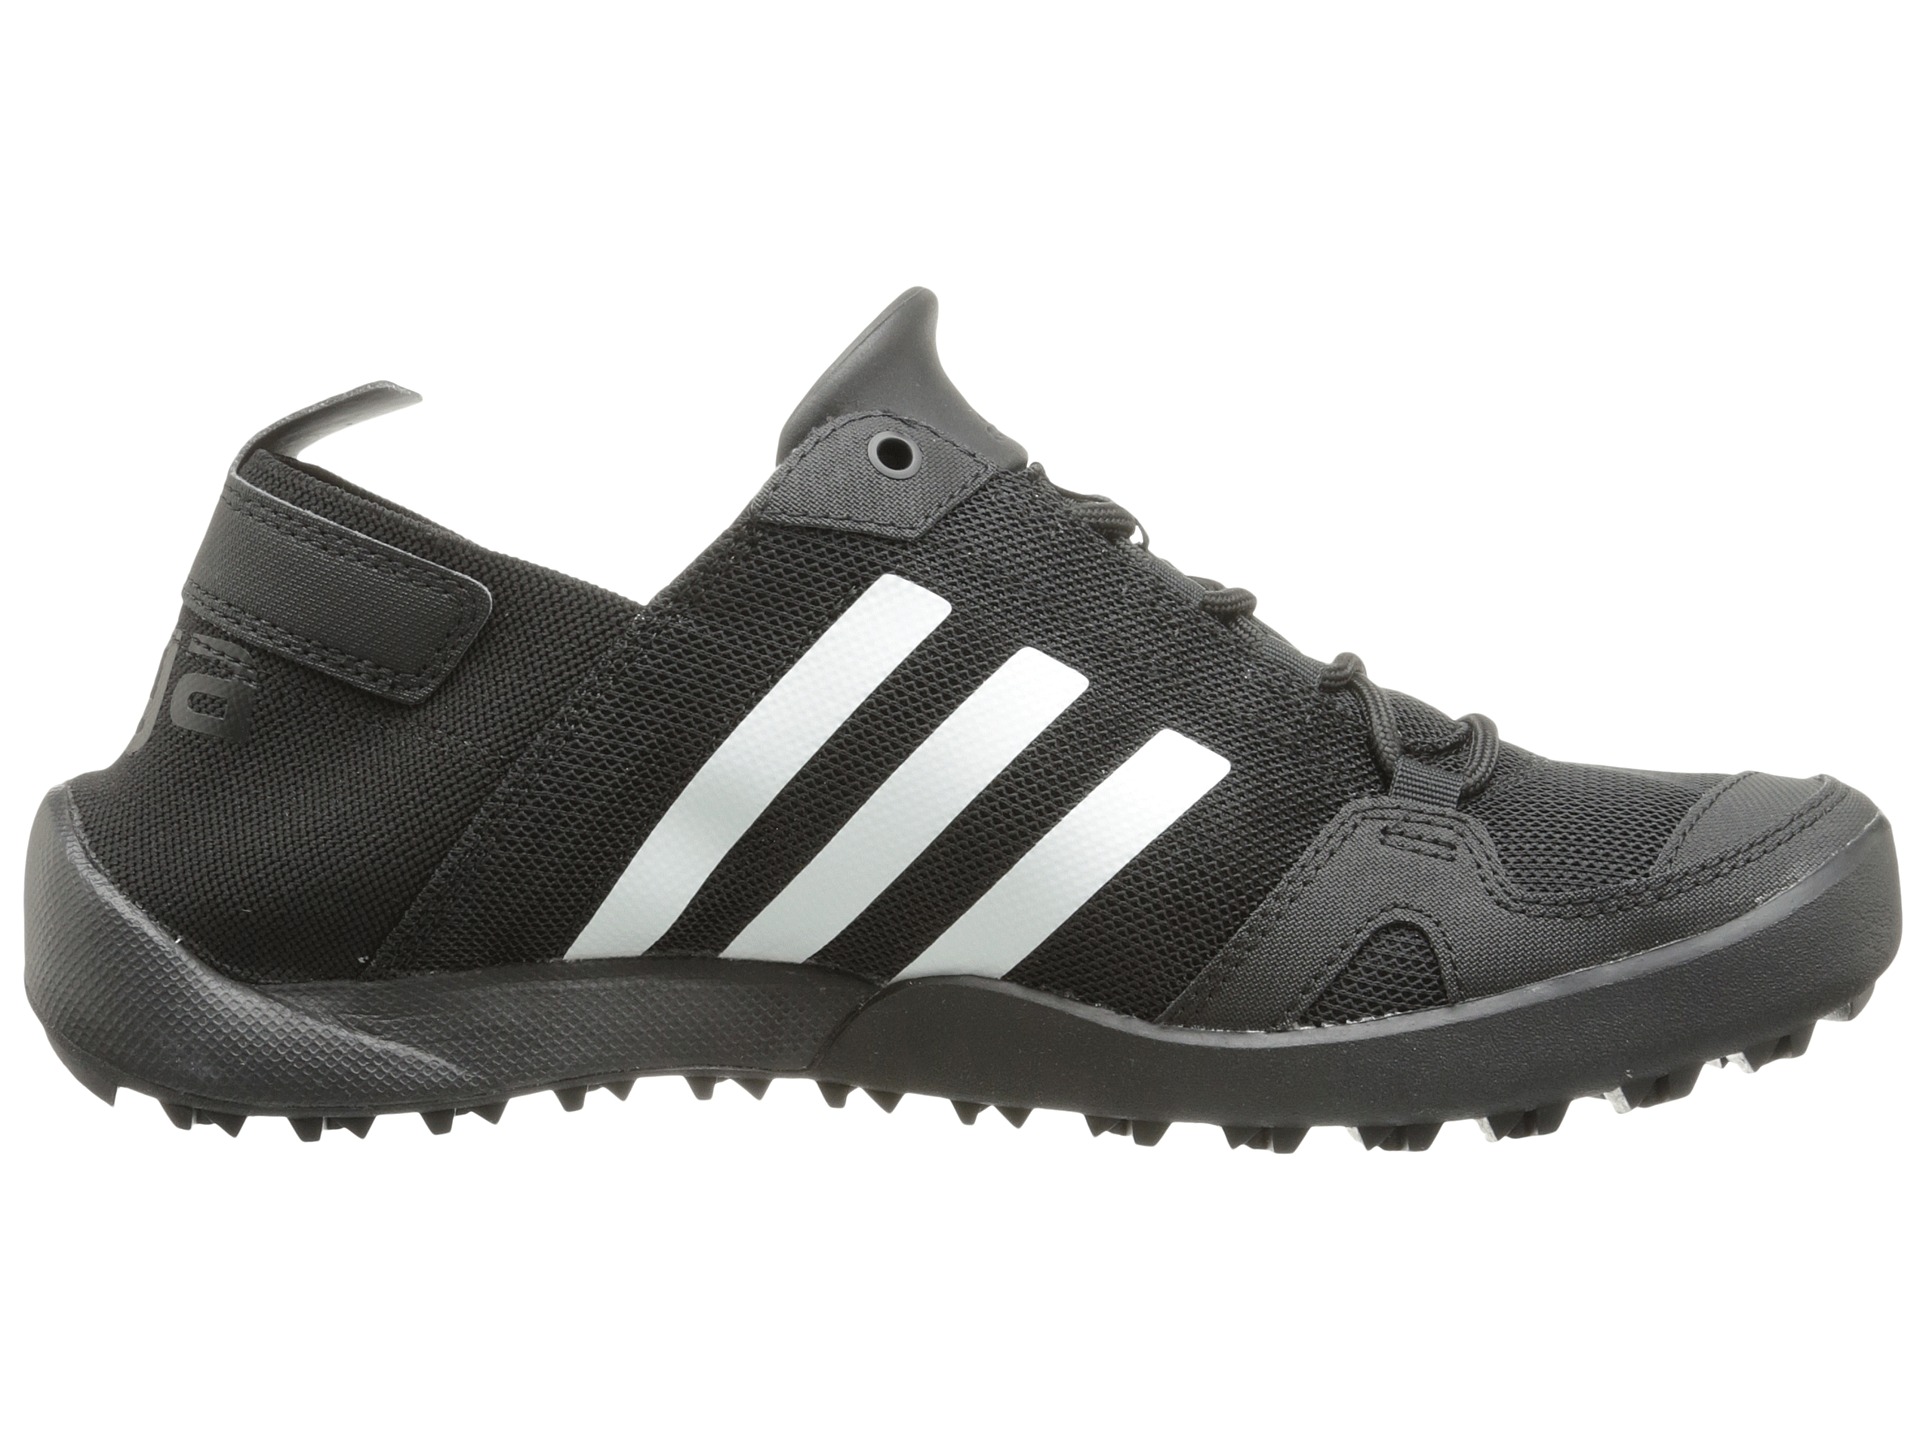 Adidas Outdoor Climacool Daroga Two | Shipped Free at Zappos